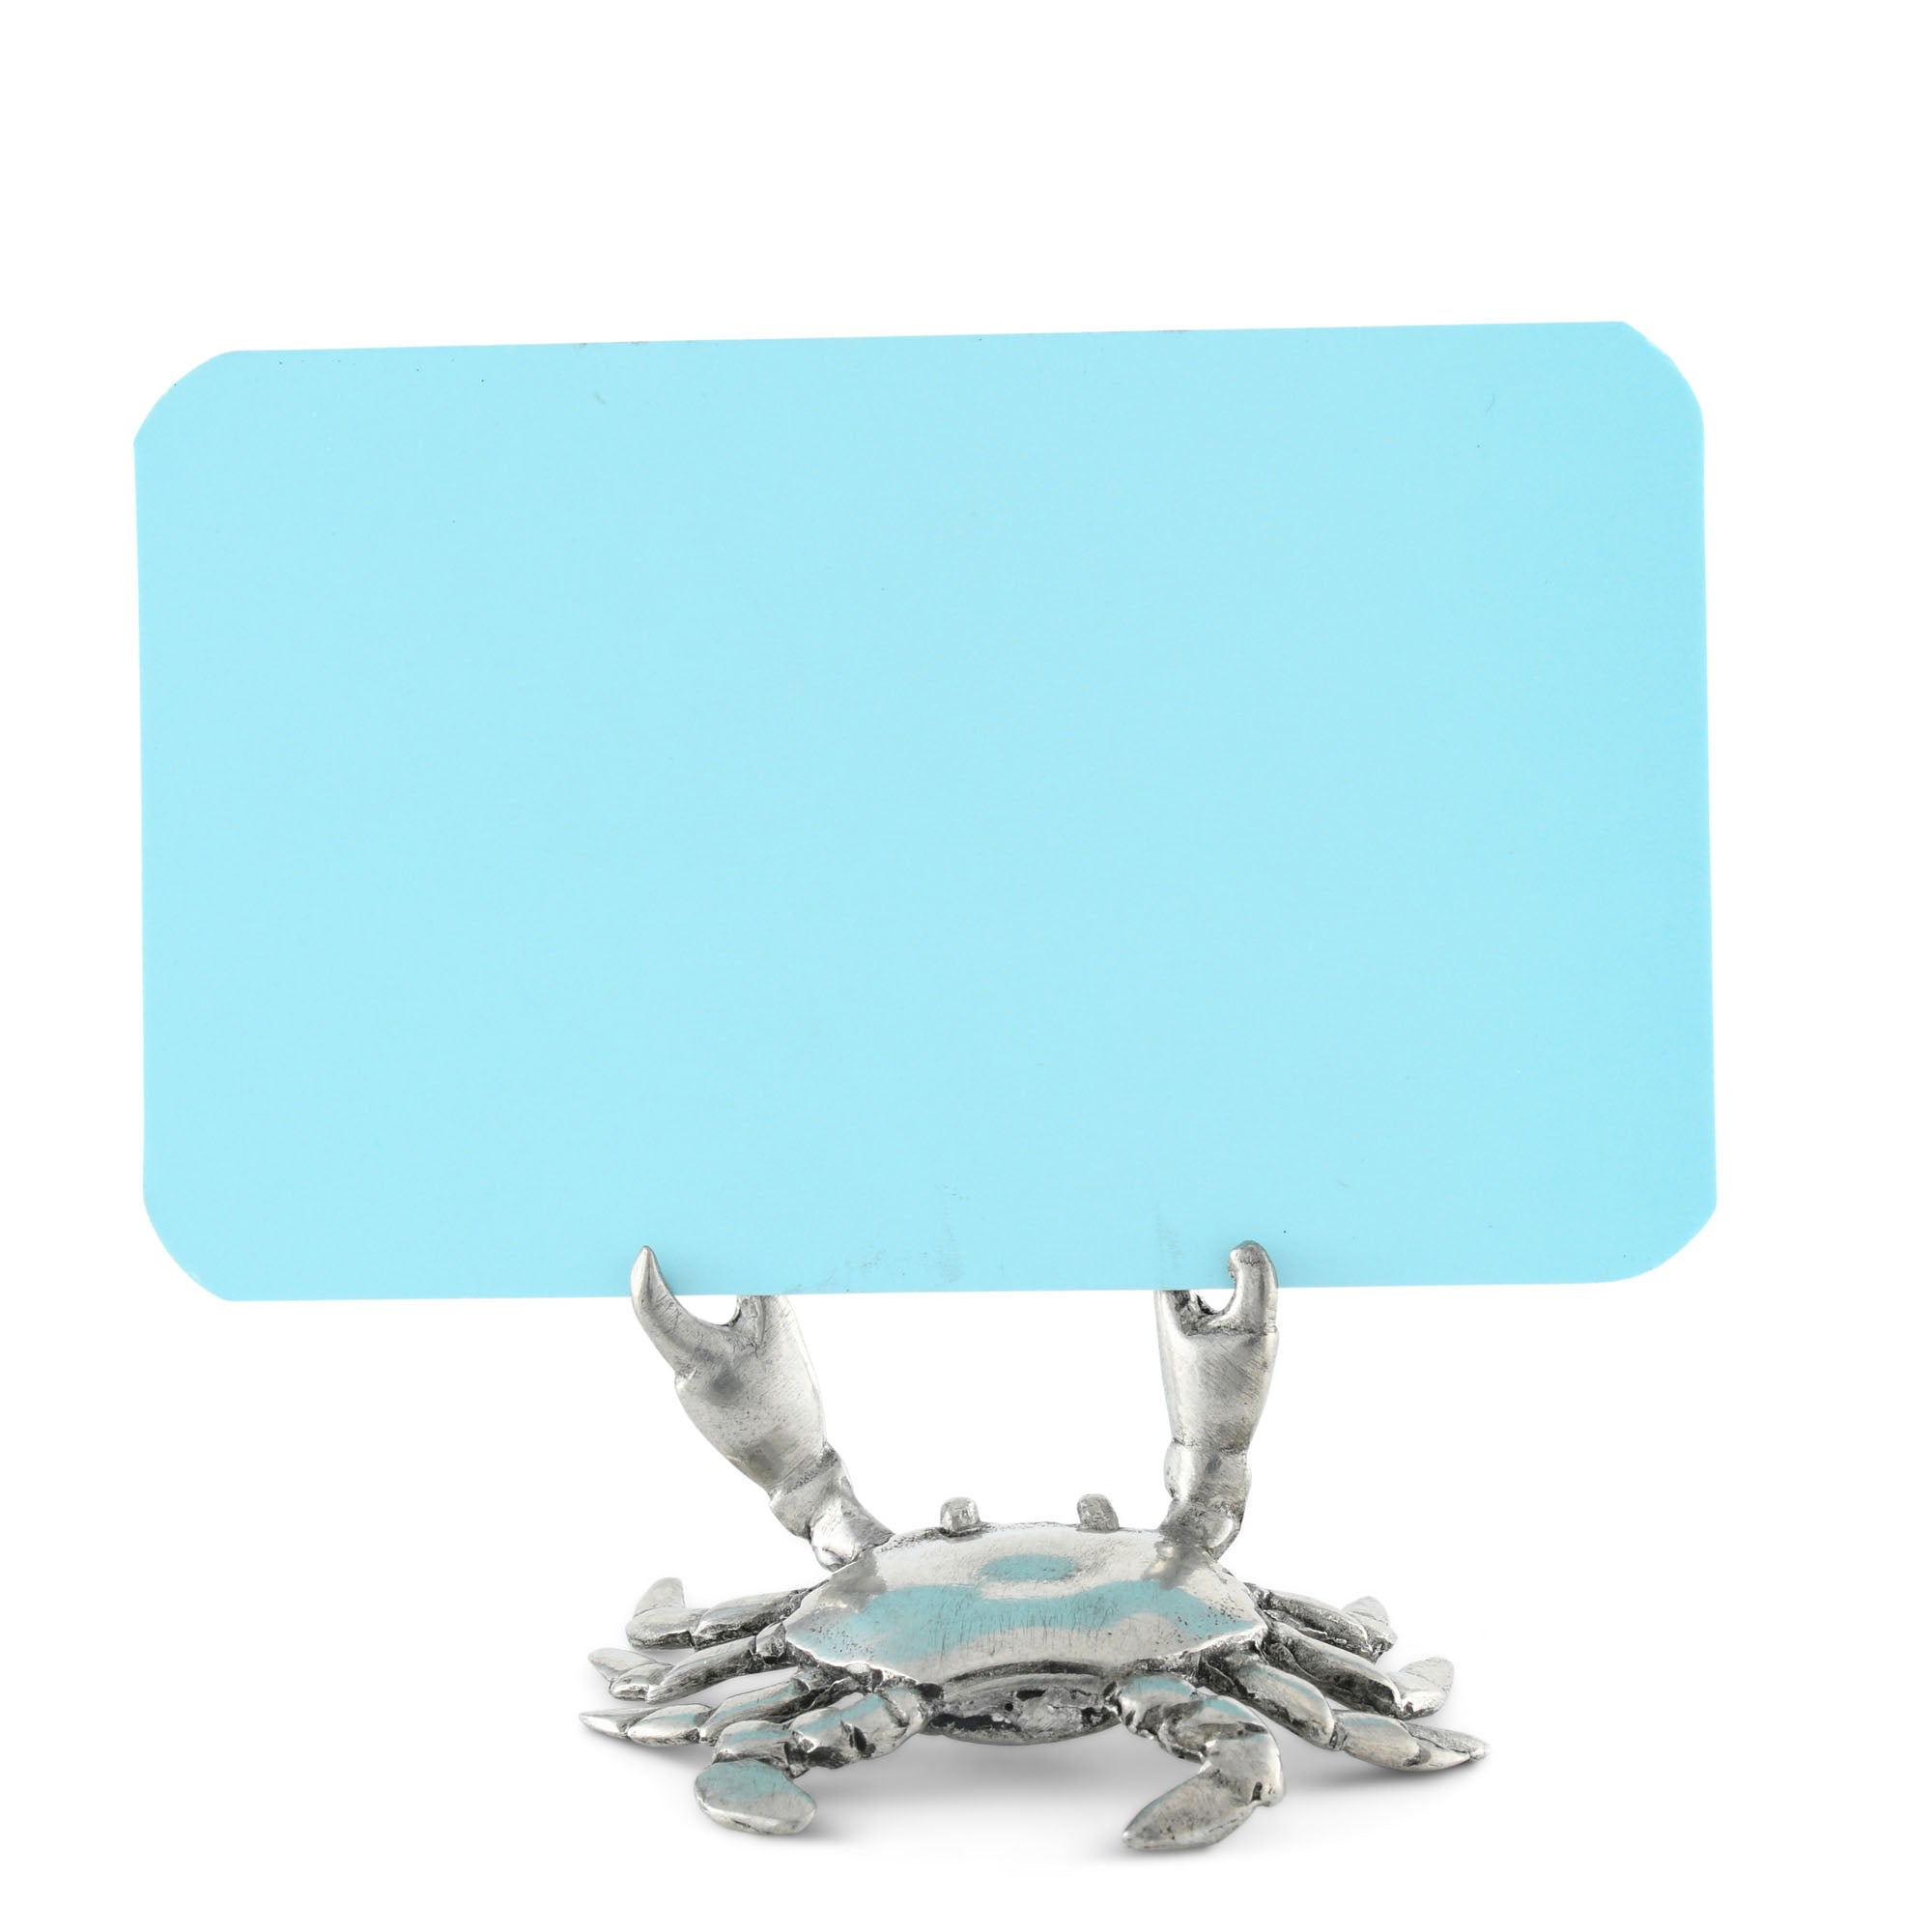 Vagabond House Pewter Crab Place Card Holder Product Image